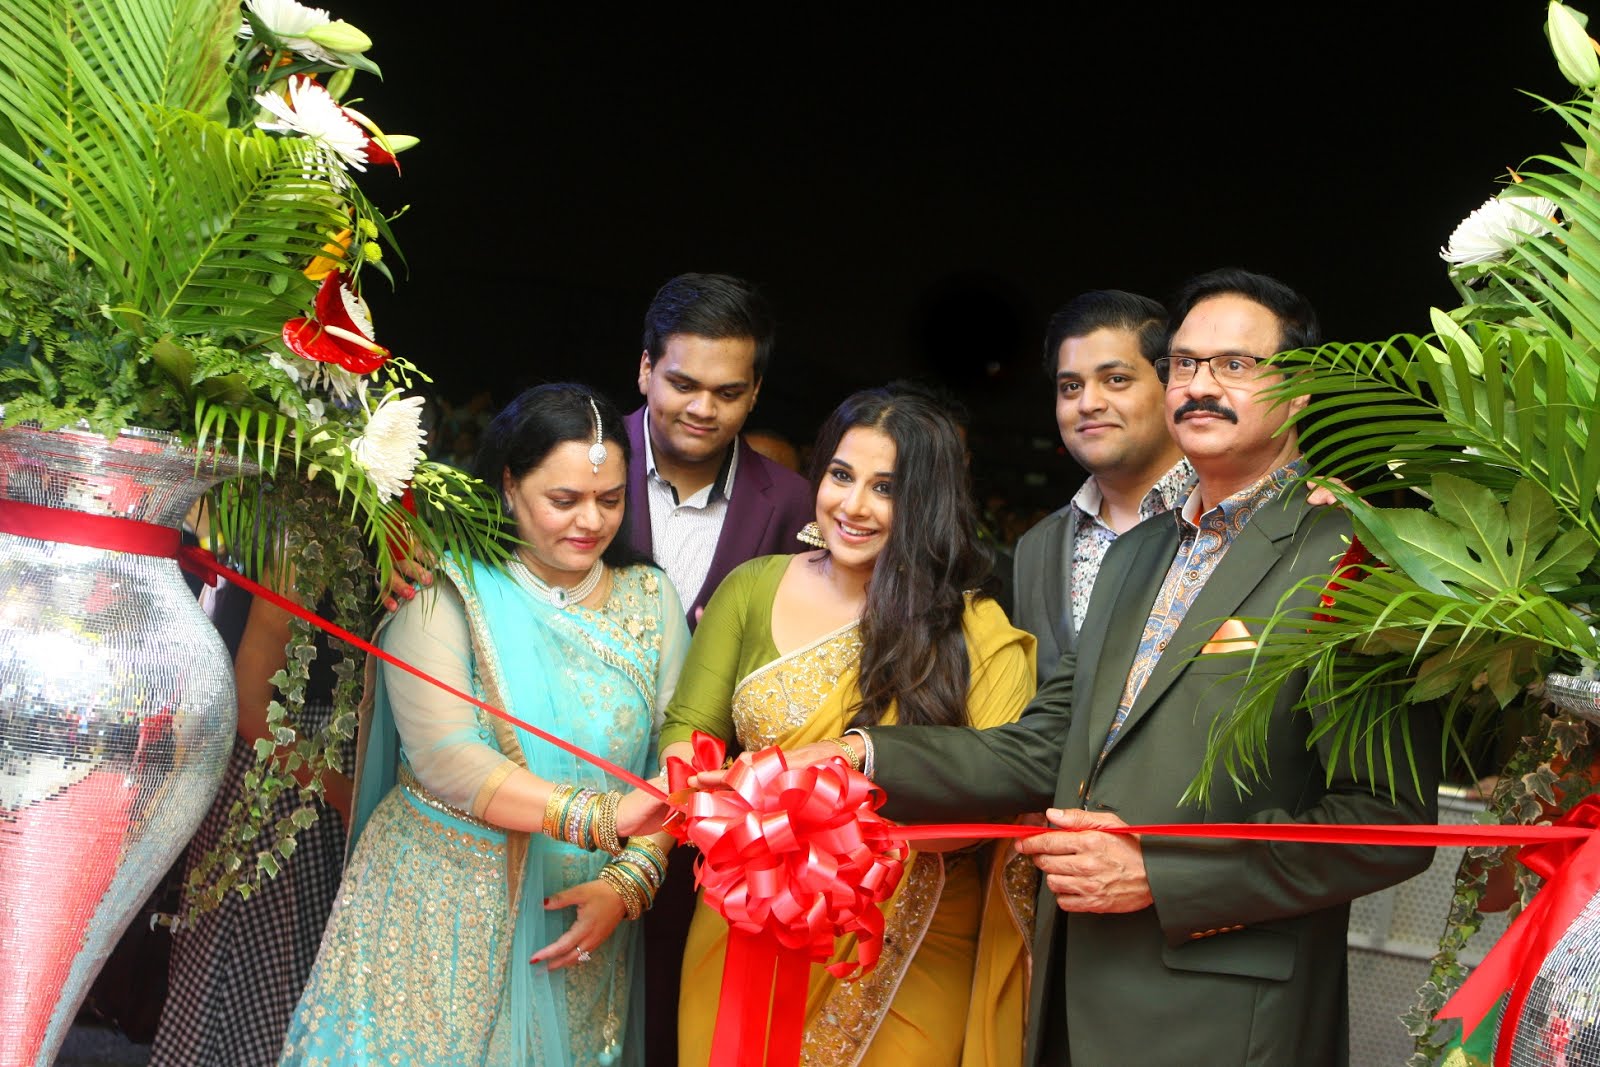 You are currently viewing Actresses Vidya Balan and Dia Mirza inaugurate Al Adil stores in Dubai